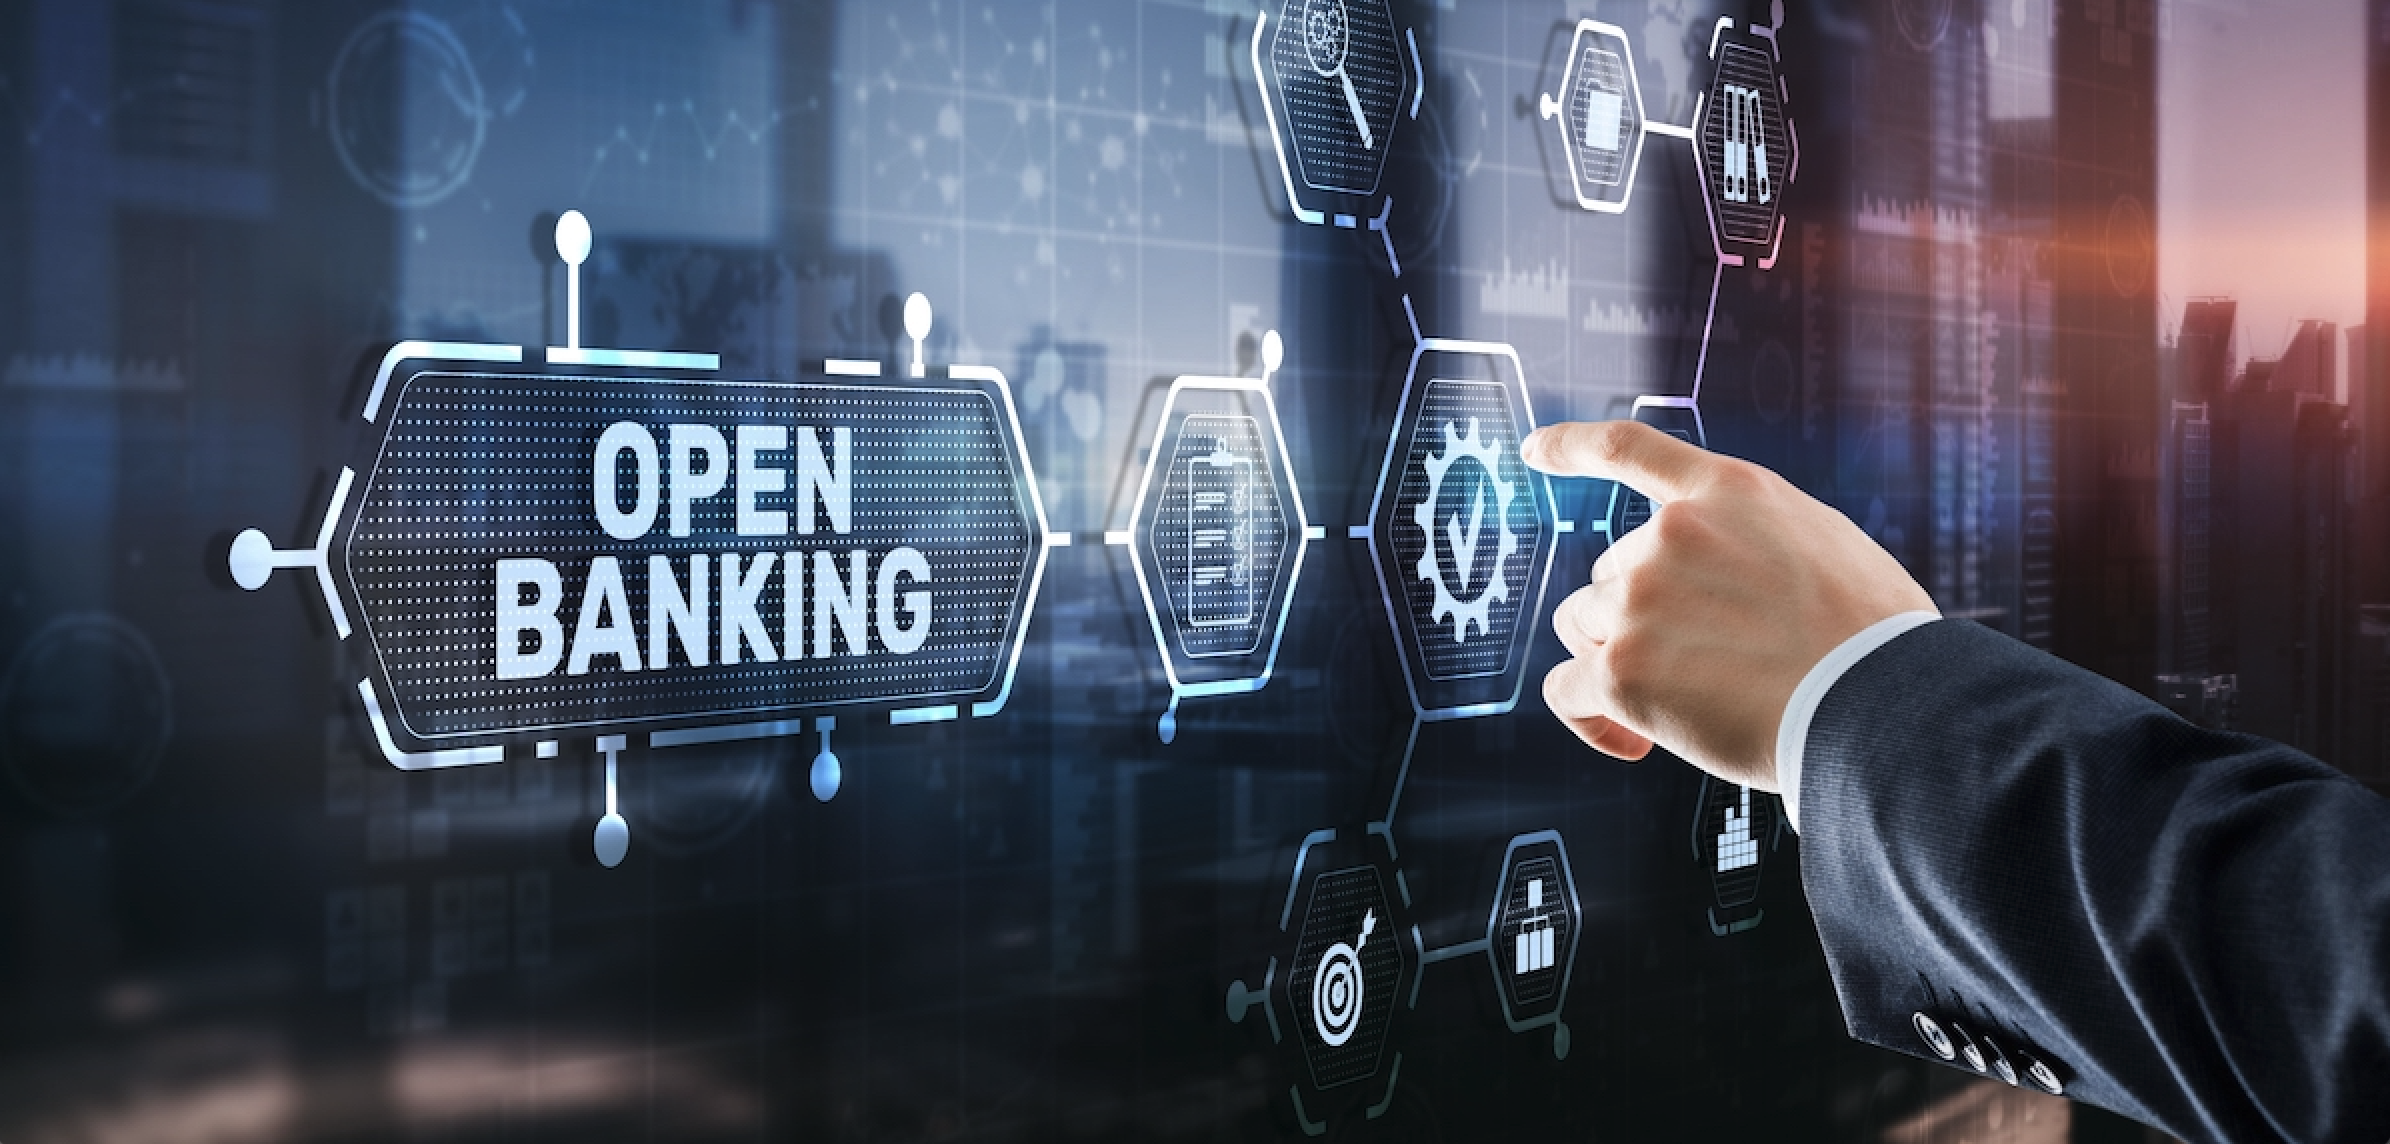 Open banking or how banks are transformed with APIs